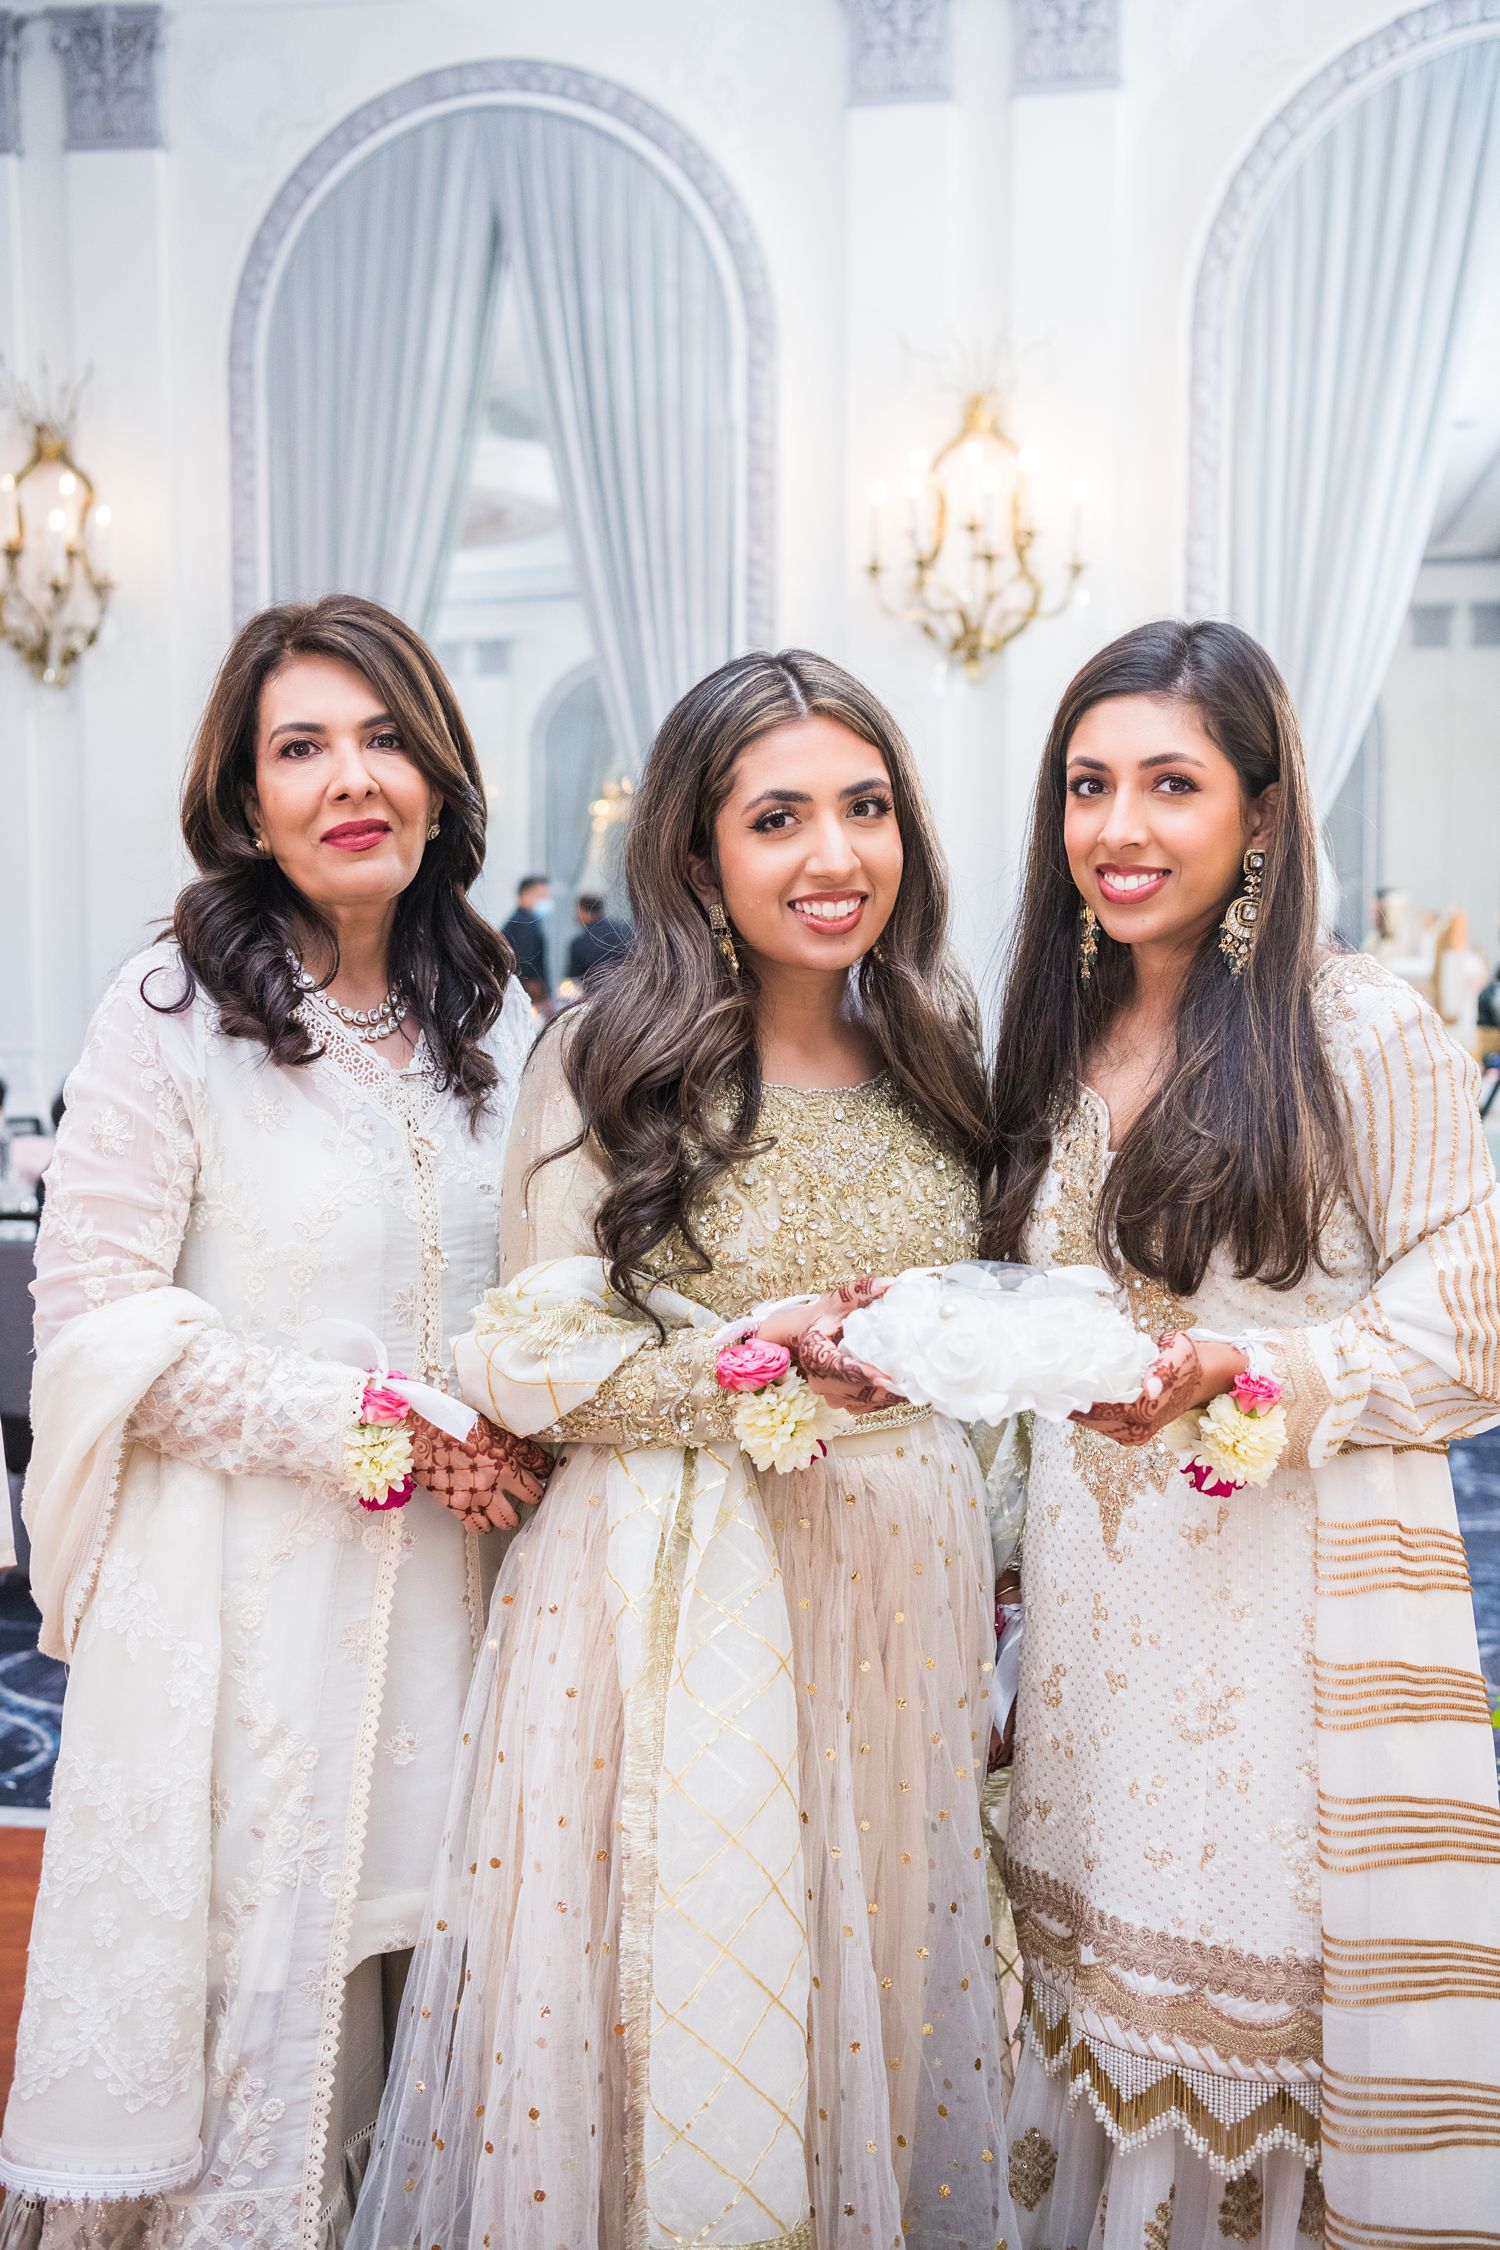 Wedding guests at Hilton Chicago photographed by Maha Studios